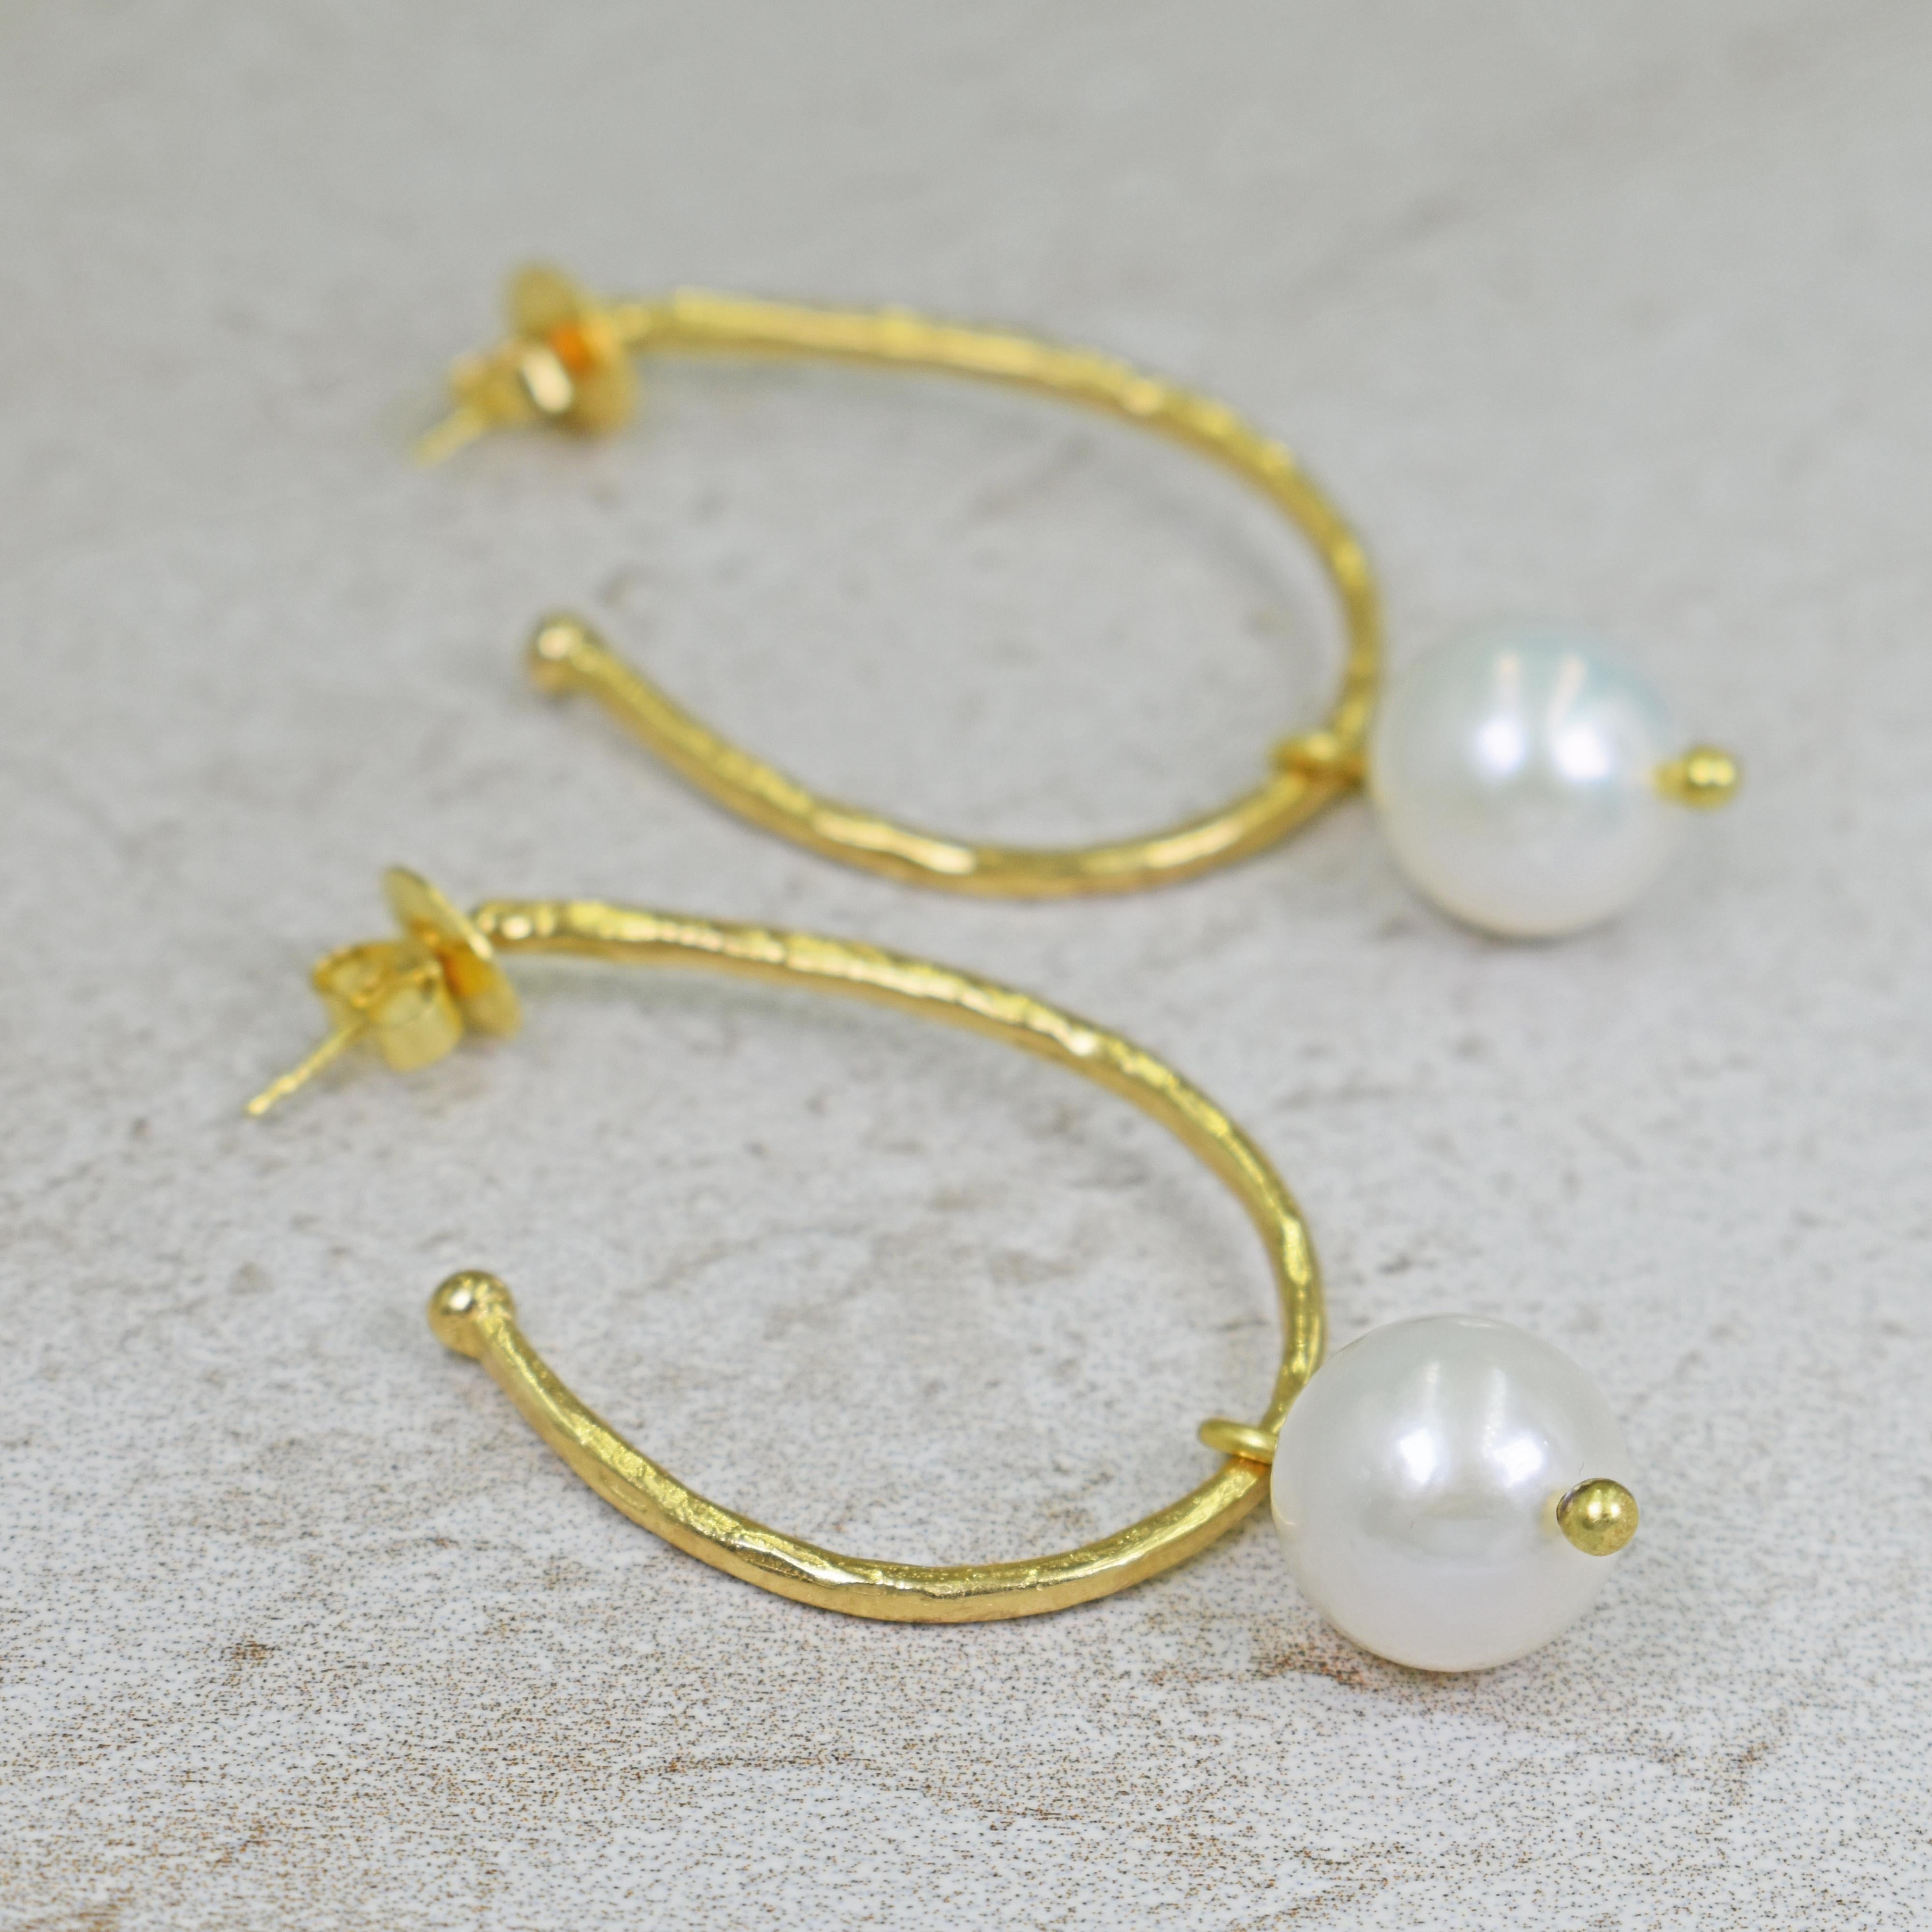 Hammered 18k yellow gold elongated hoop stud earrings with 13mm White Freshwater Pearl charms. Hoop earrings are 1.63 inches in length, and with pearl charms, earrings are 2.32 inches in total length. Charms can be removed so the hoops can be worn